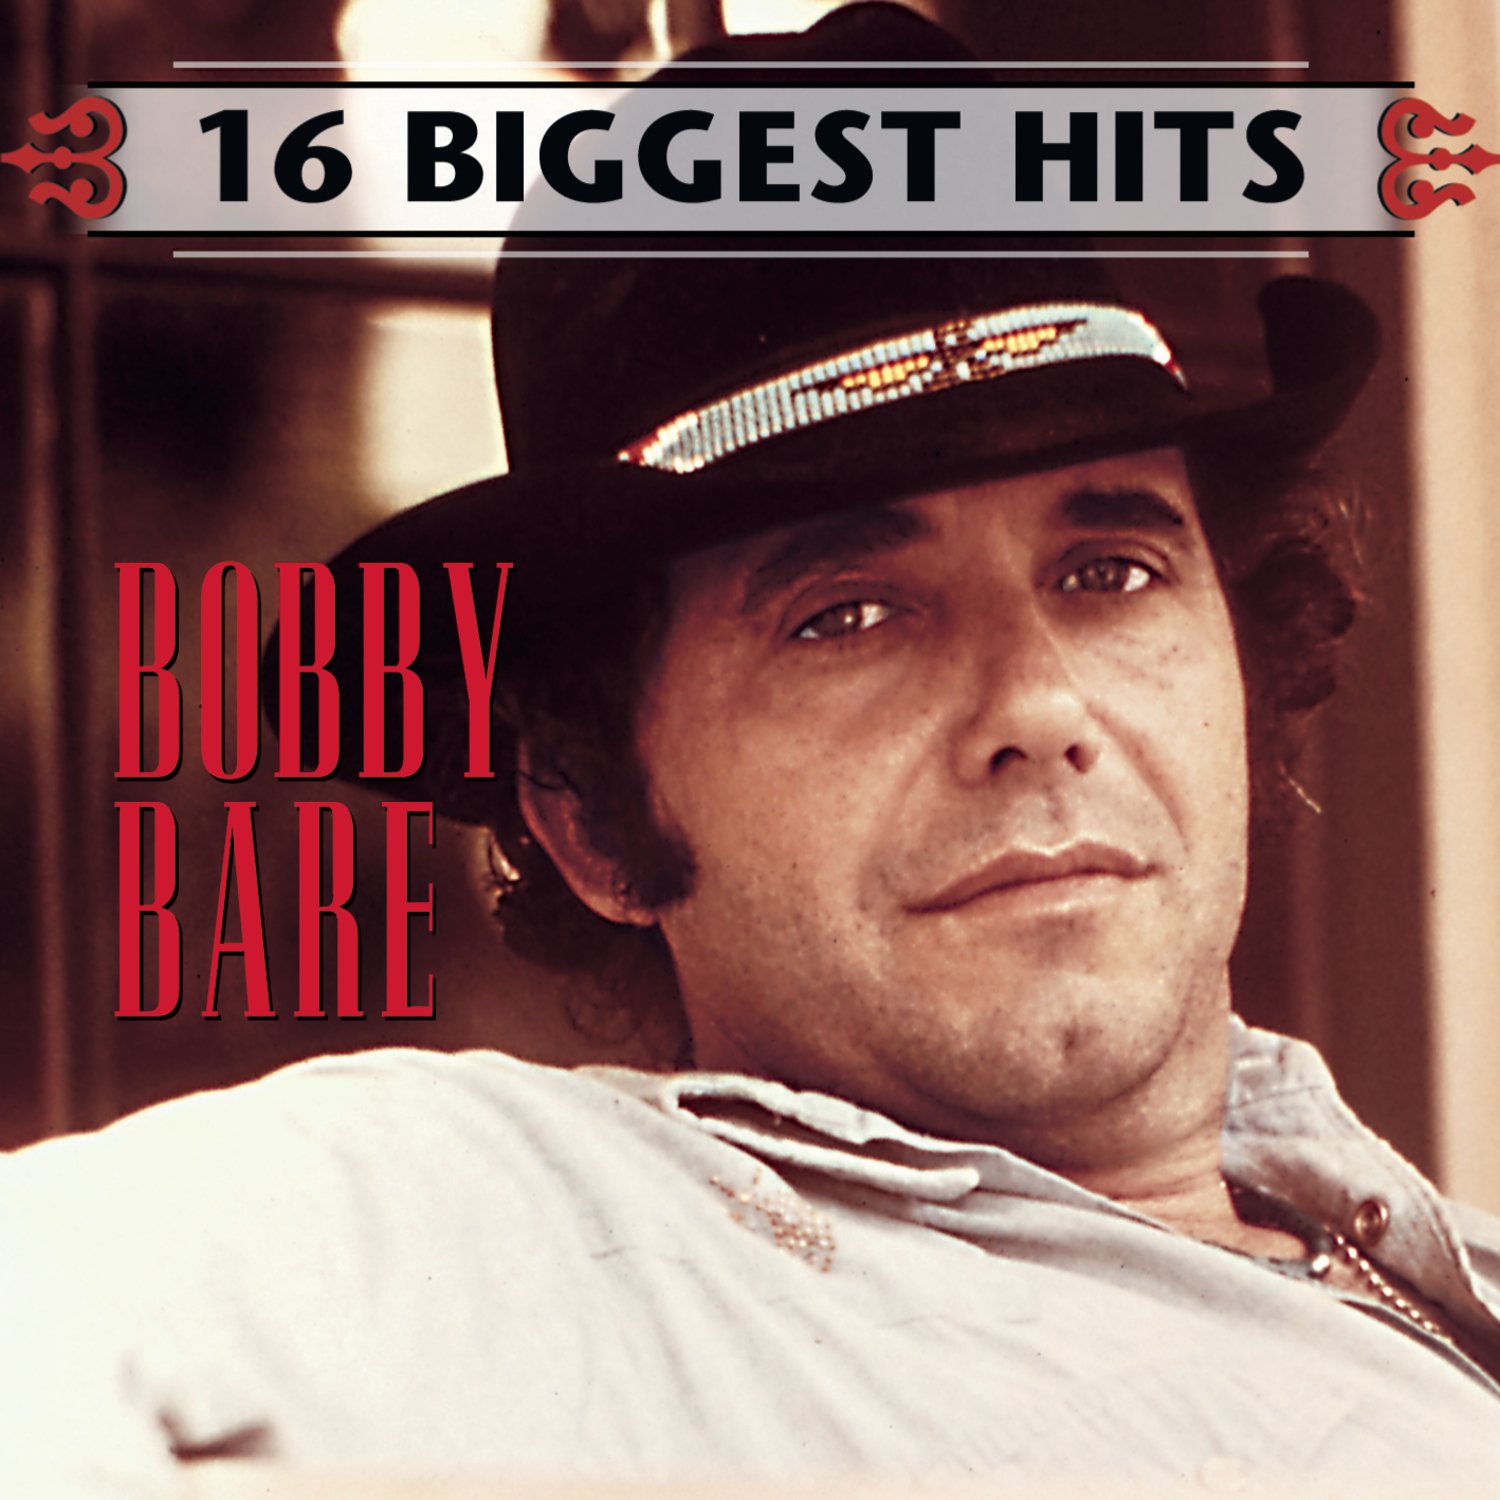 Art for The Gambler by Bobby Bare